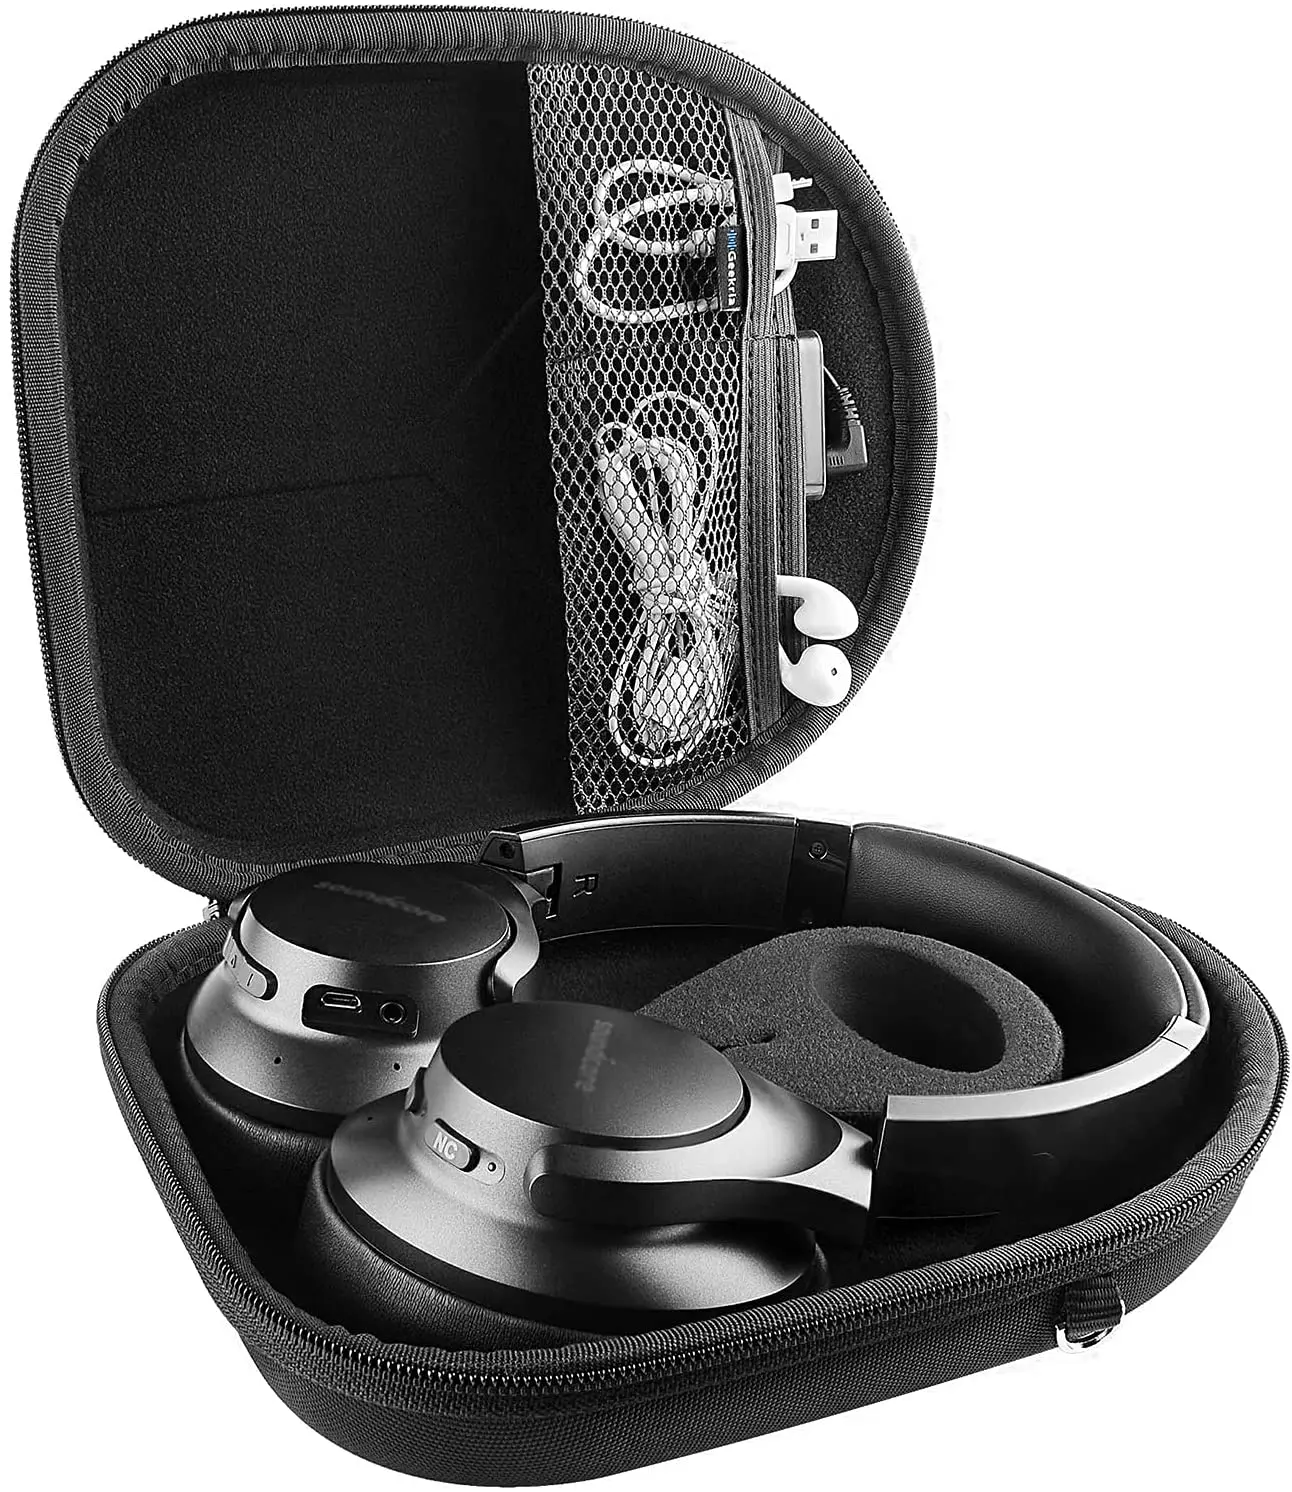 Geekria Headphones Case For Anker Soundcore Life Q35 Q20, Hard Portable Bluetooth Earphones Headset Bag For Accessories Storage enlarge